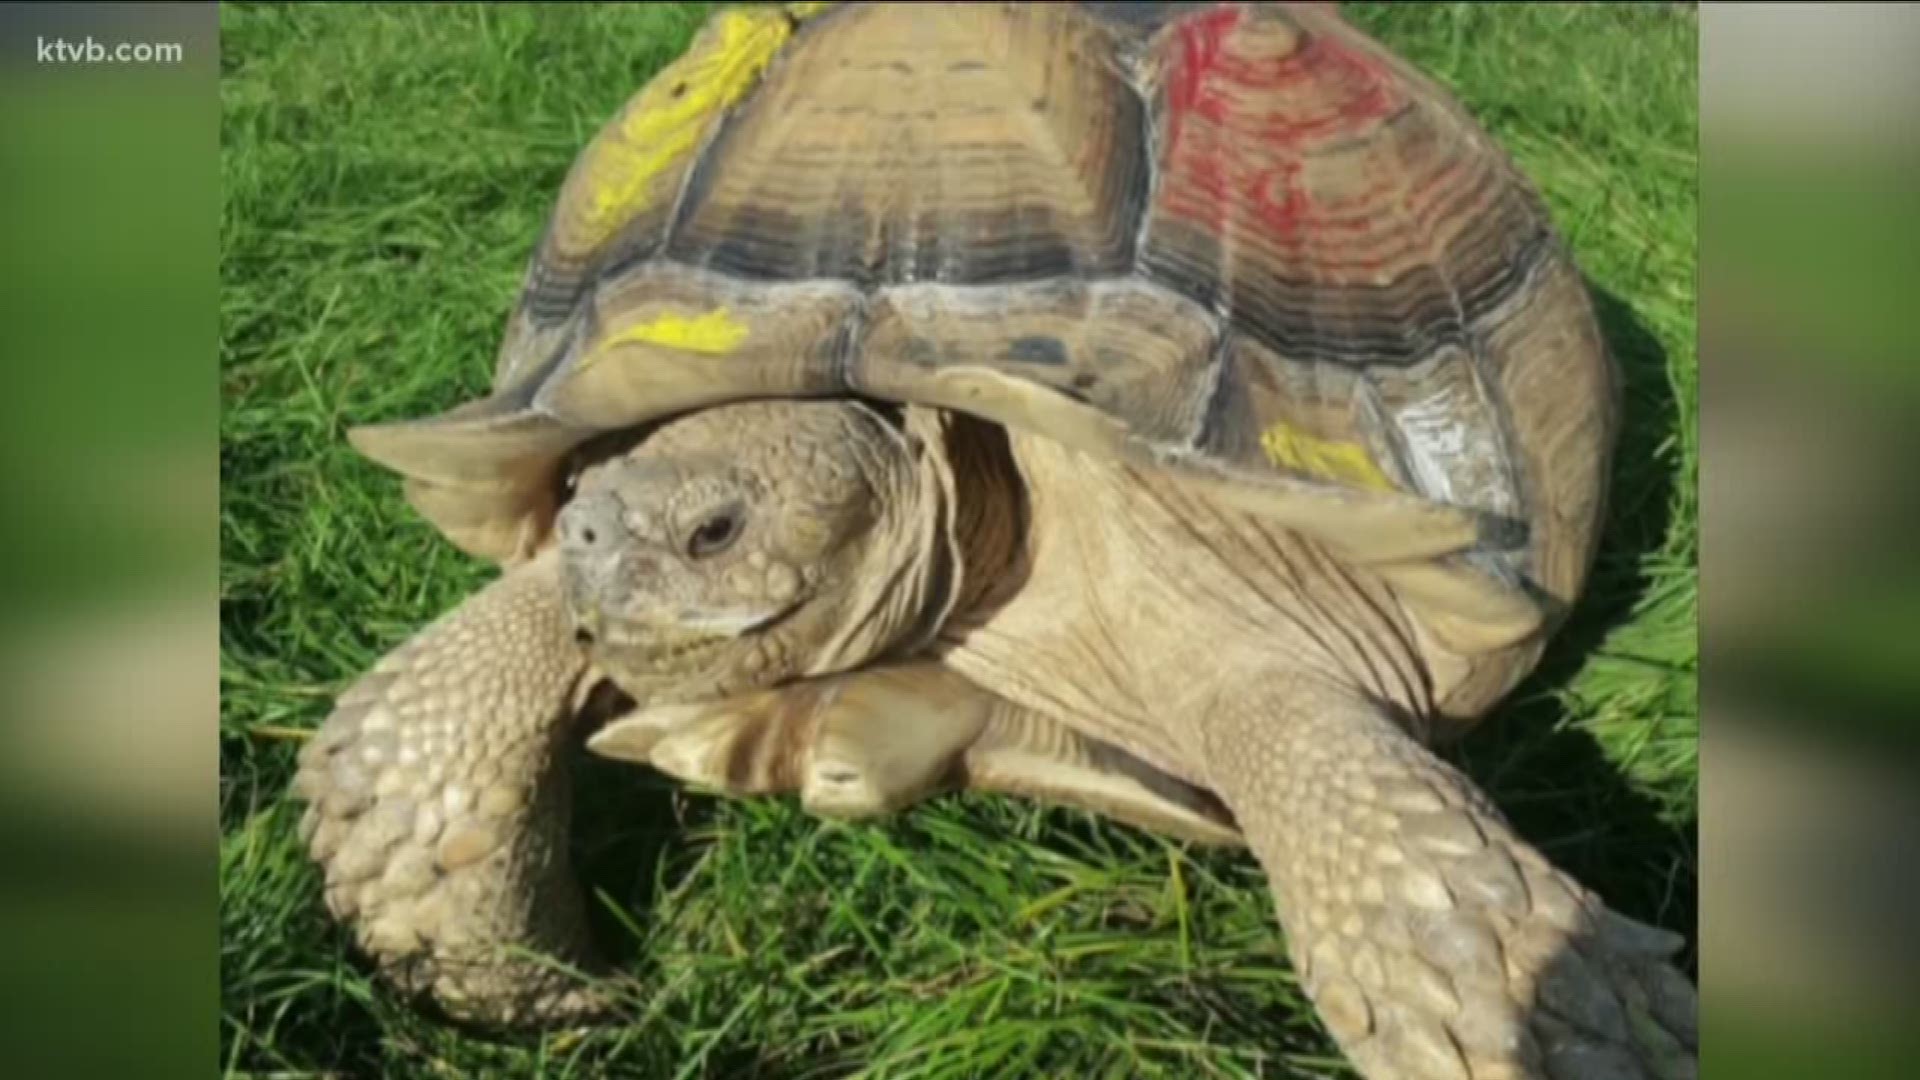 The tortoise disappeared from a fenced yard Monday.